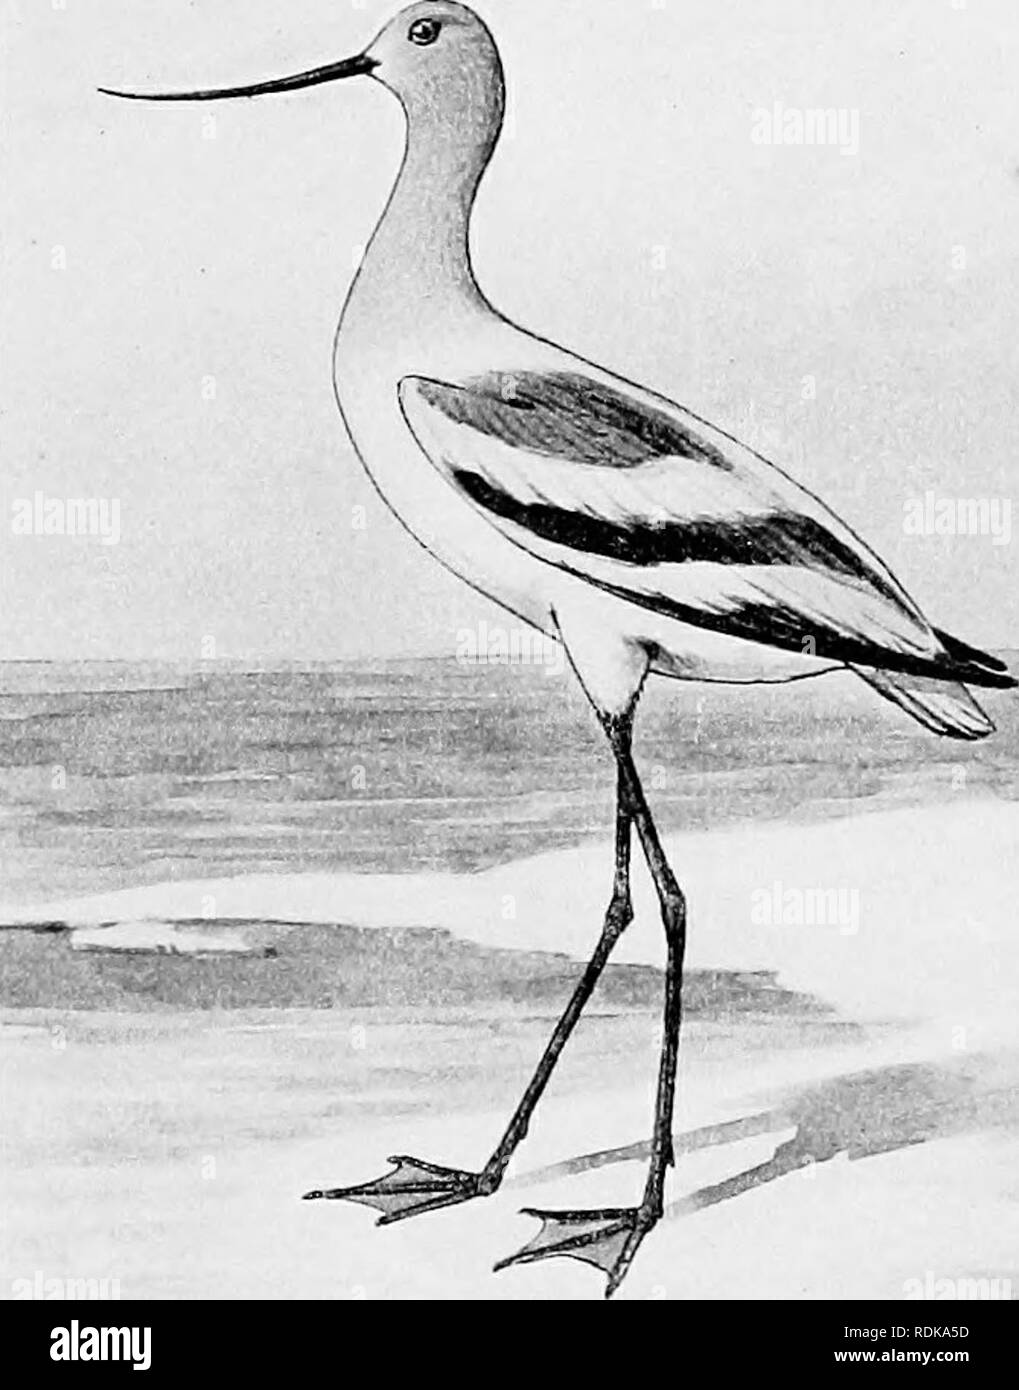 . The birds of Illinois and Wisconsin. Birds; Birds. Jan., 1909. Birds of Illinois and Wisconsin^Cory. 95 Back, grayish, mottled with dusky or whitish; bill, over 1.05; tarsus, over i inch; toes, with narrow web on sides; wing, 4.75 to 4.9s (male). Steganopus tricolor. Wilson's Phalarope. See No. 104. Family RECURVIROSTRIDvE. 'y AVOCETS AND STILTS. Legs, long; tarsus over 3.50 inches; bill, curved upward or straight. Bill, curved upward; head and neck, pale rufous (summer), white or grayish (winter); back and tail, white; axillars, white; belly, white; first primary, dark with dark shaft; toes Stock Photo